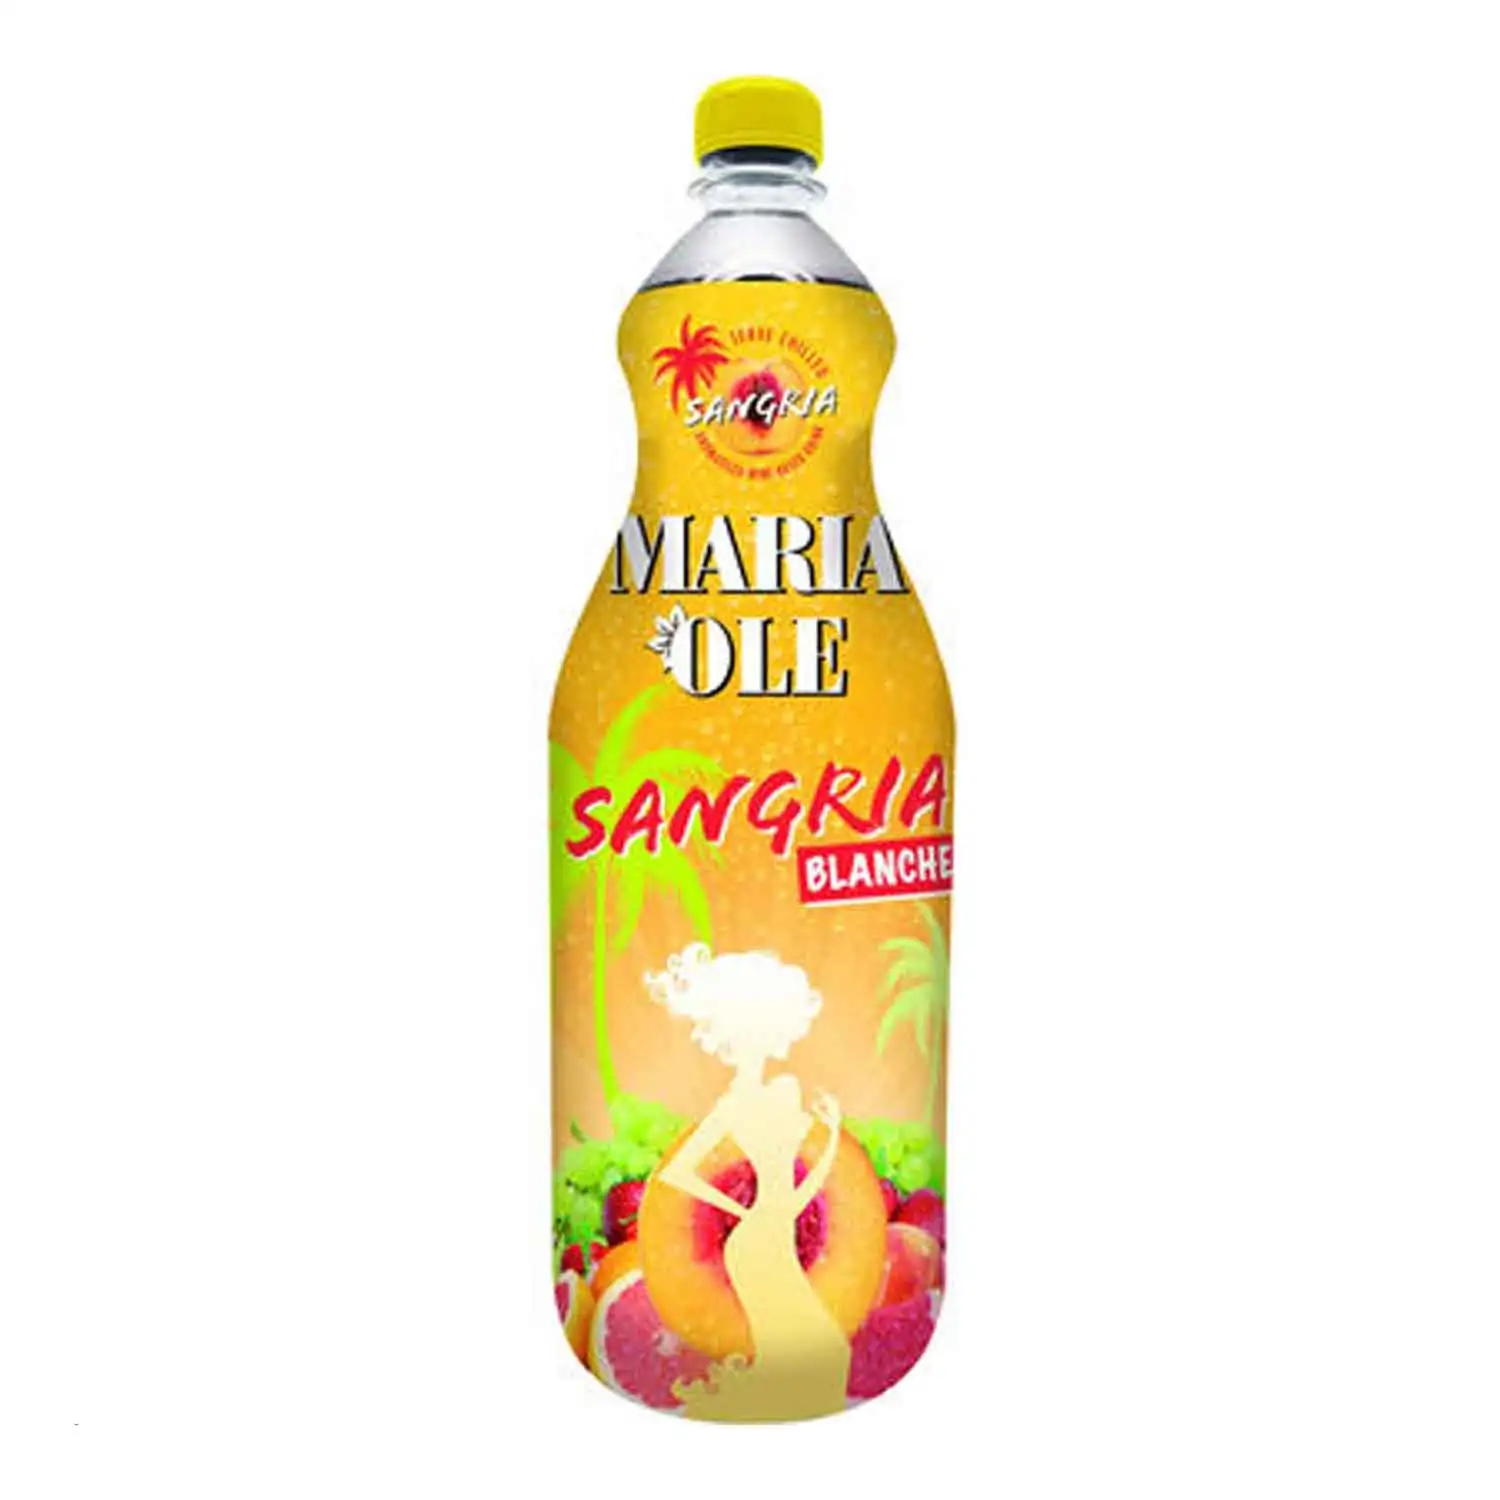 Maria Ole sangria white 1,5l Alc 7% - Buy at Real Tobacco